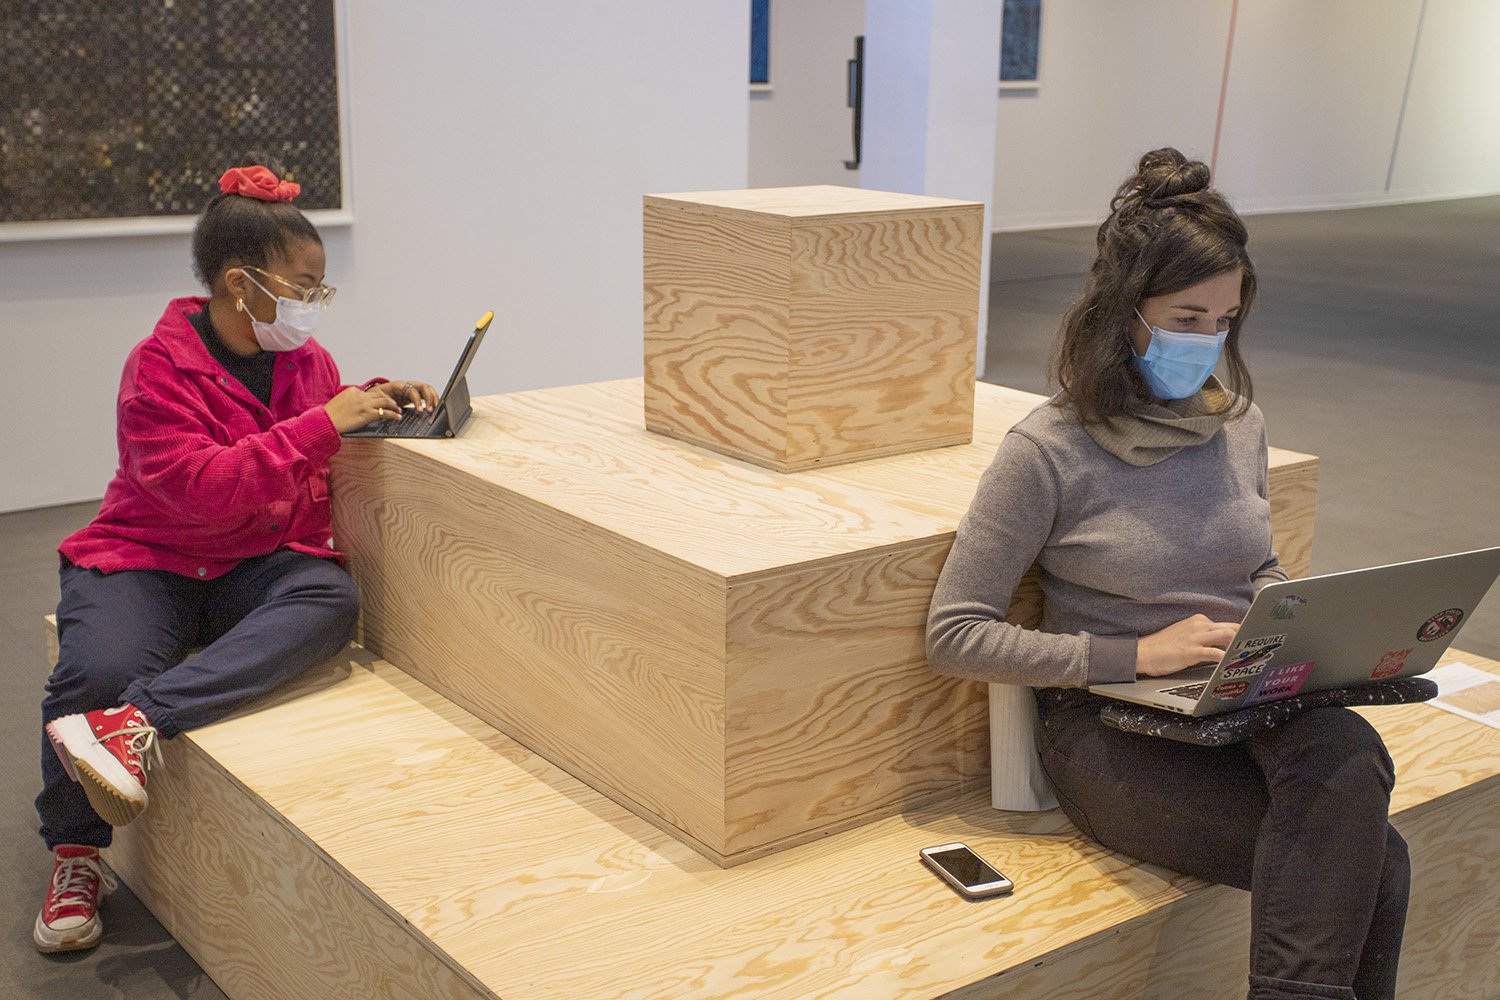 Two visitors working on their laptops sitting on a plywood pyramid sculpture